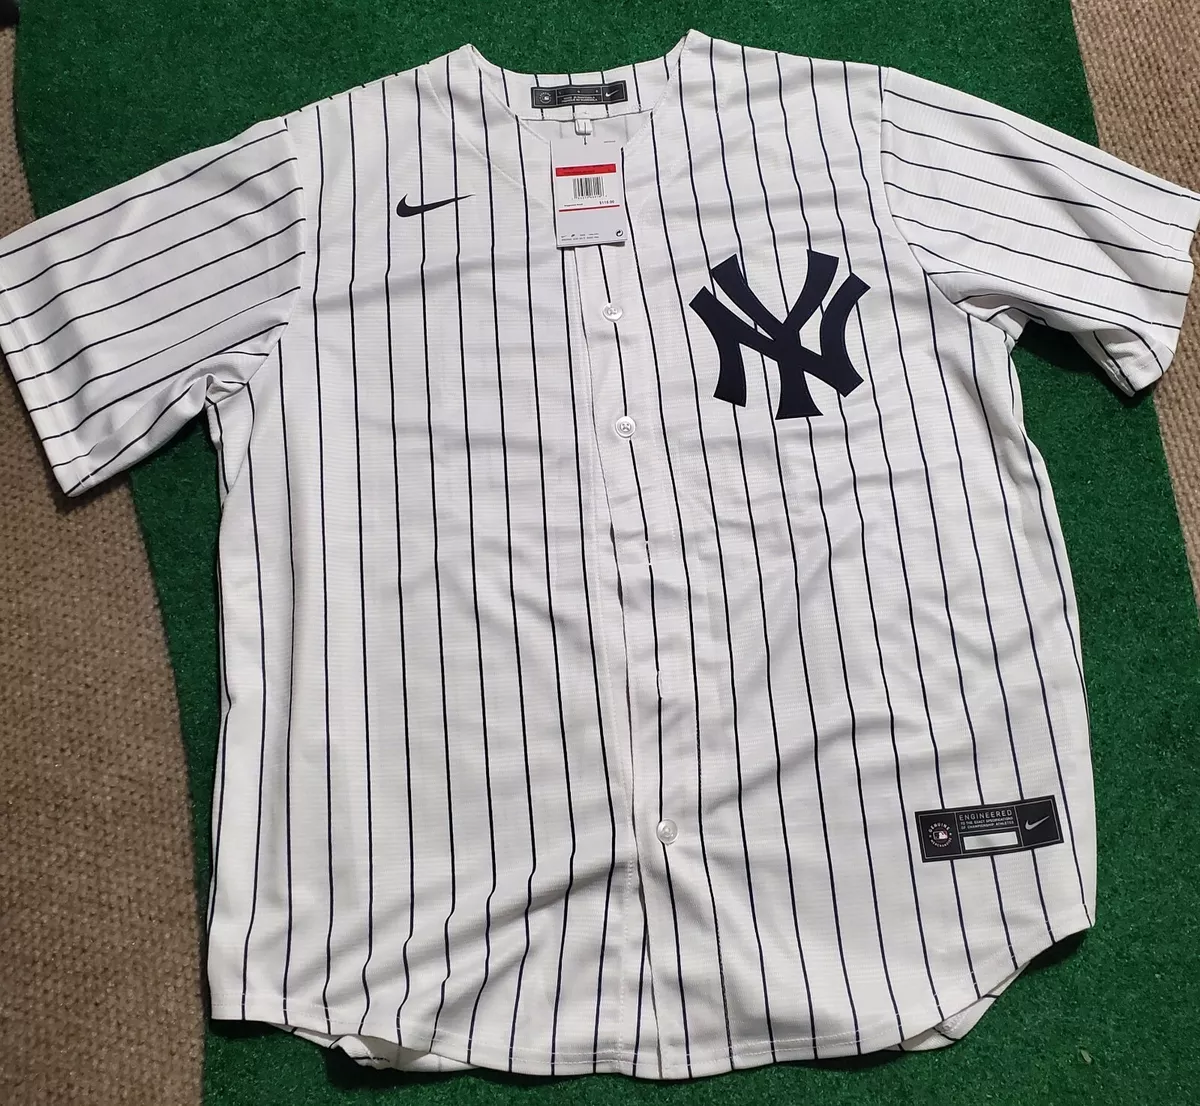 authentic don mattingly jersey